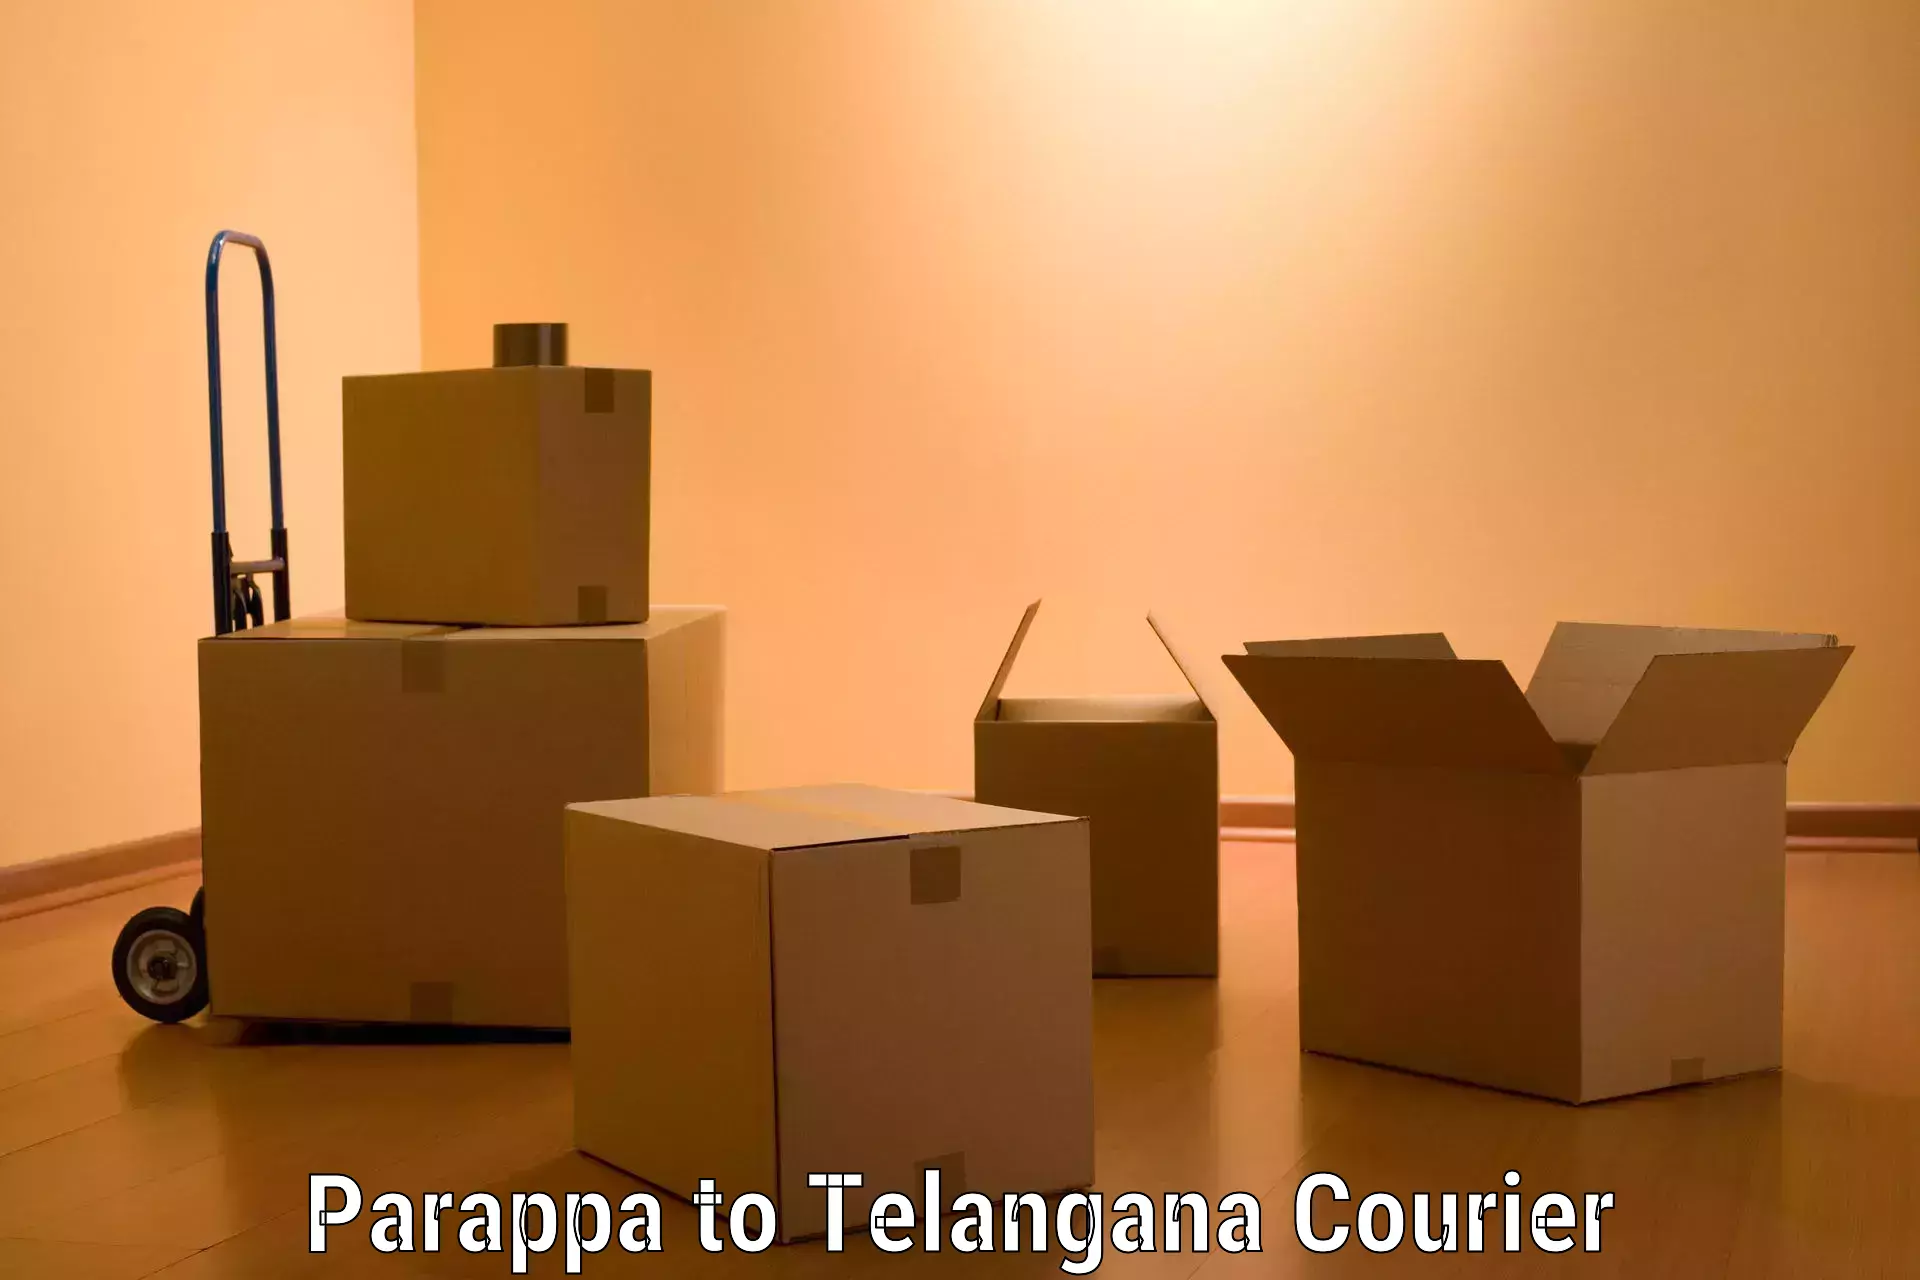 Hassle-free relocation Parappa to Husnabad